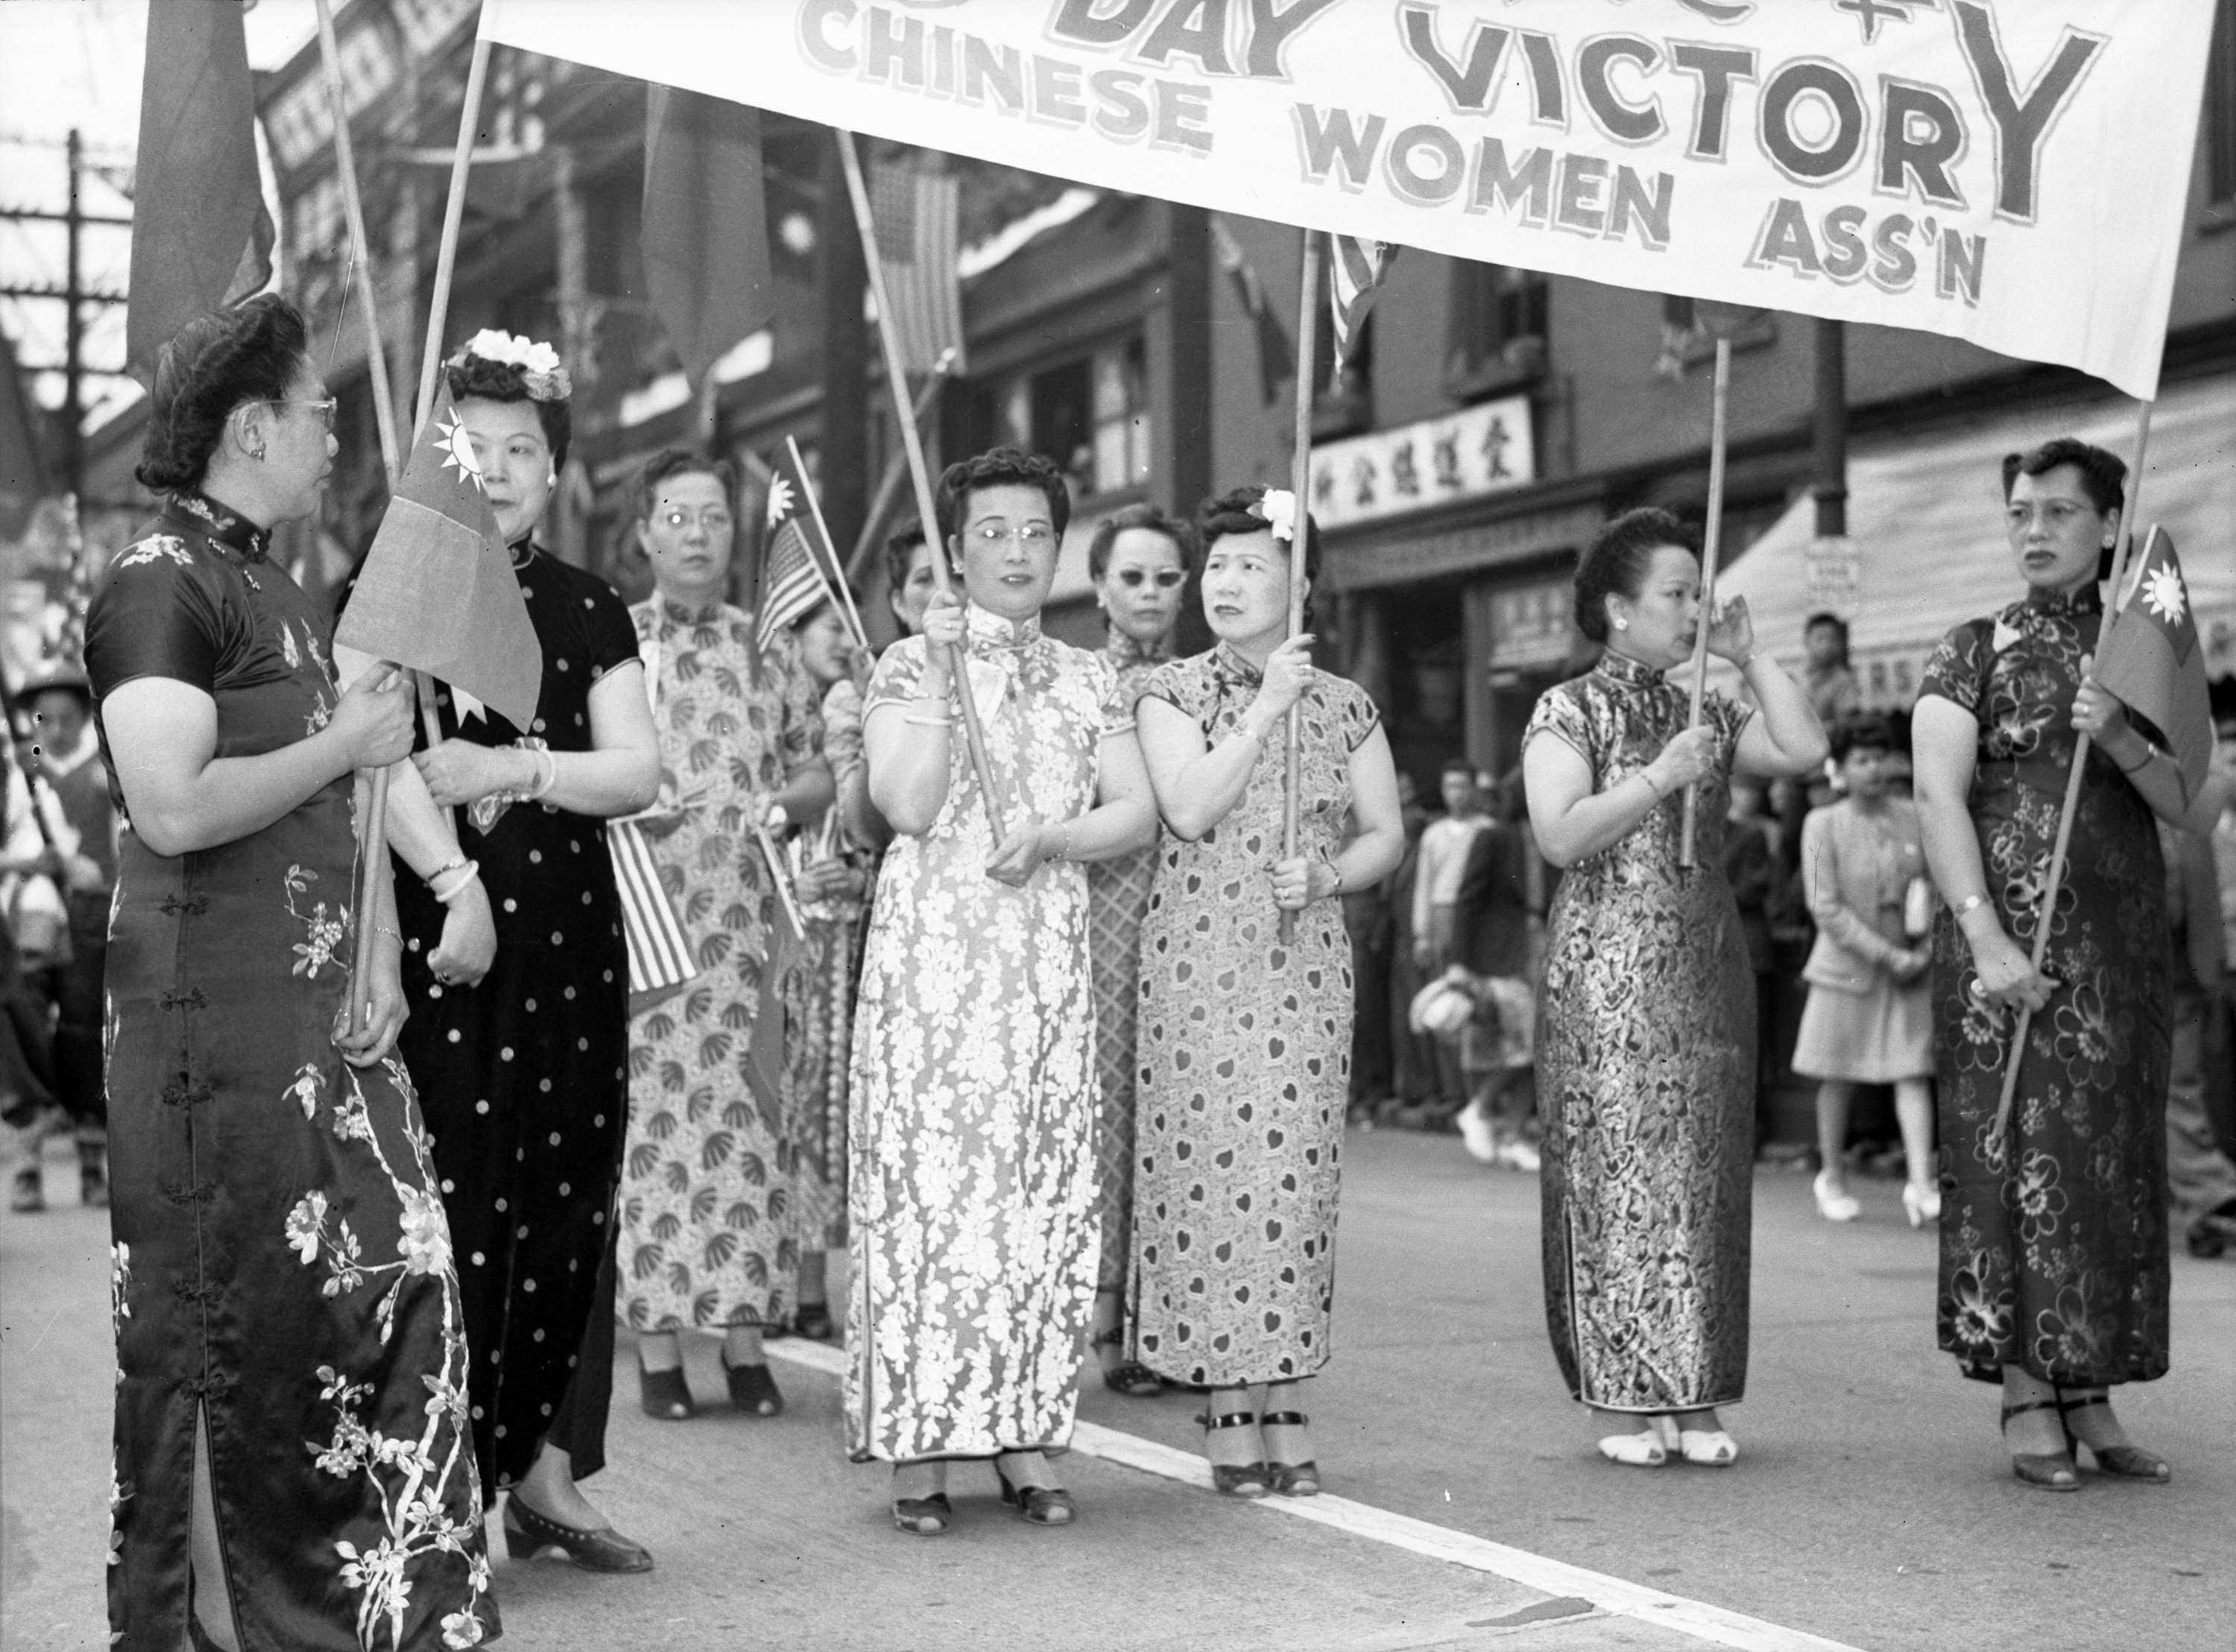 Several middle-aged women wearing qipaos walk down the street hoisting a victory banner.